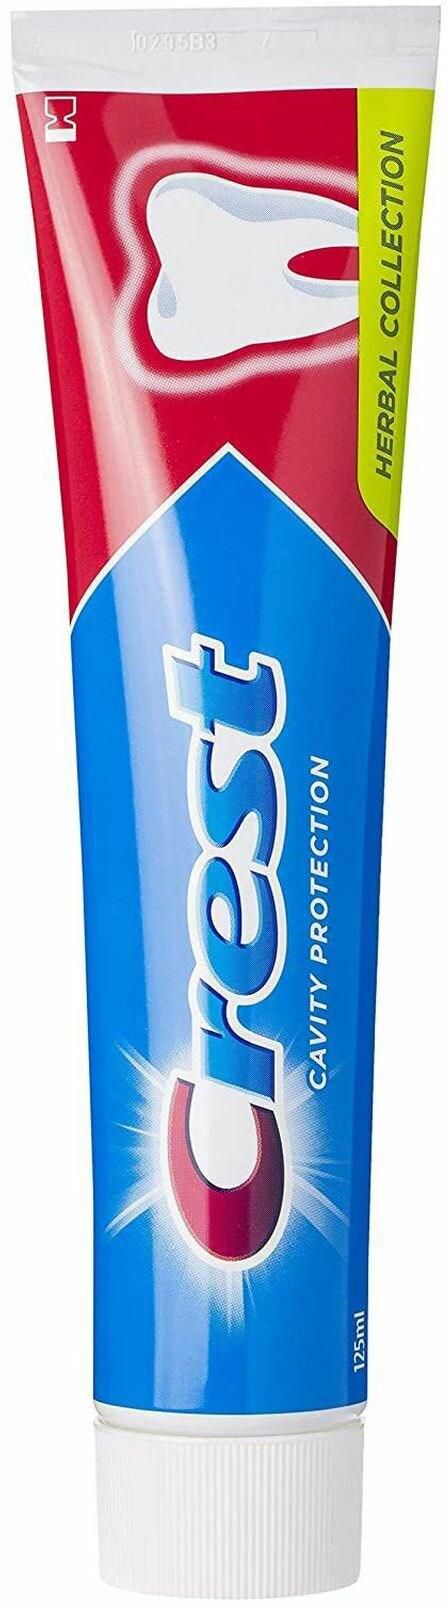 Crest herbal collection cavity protect toothpaste 125ml